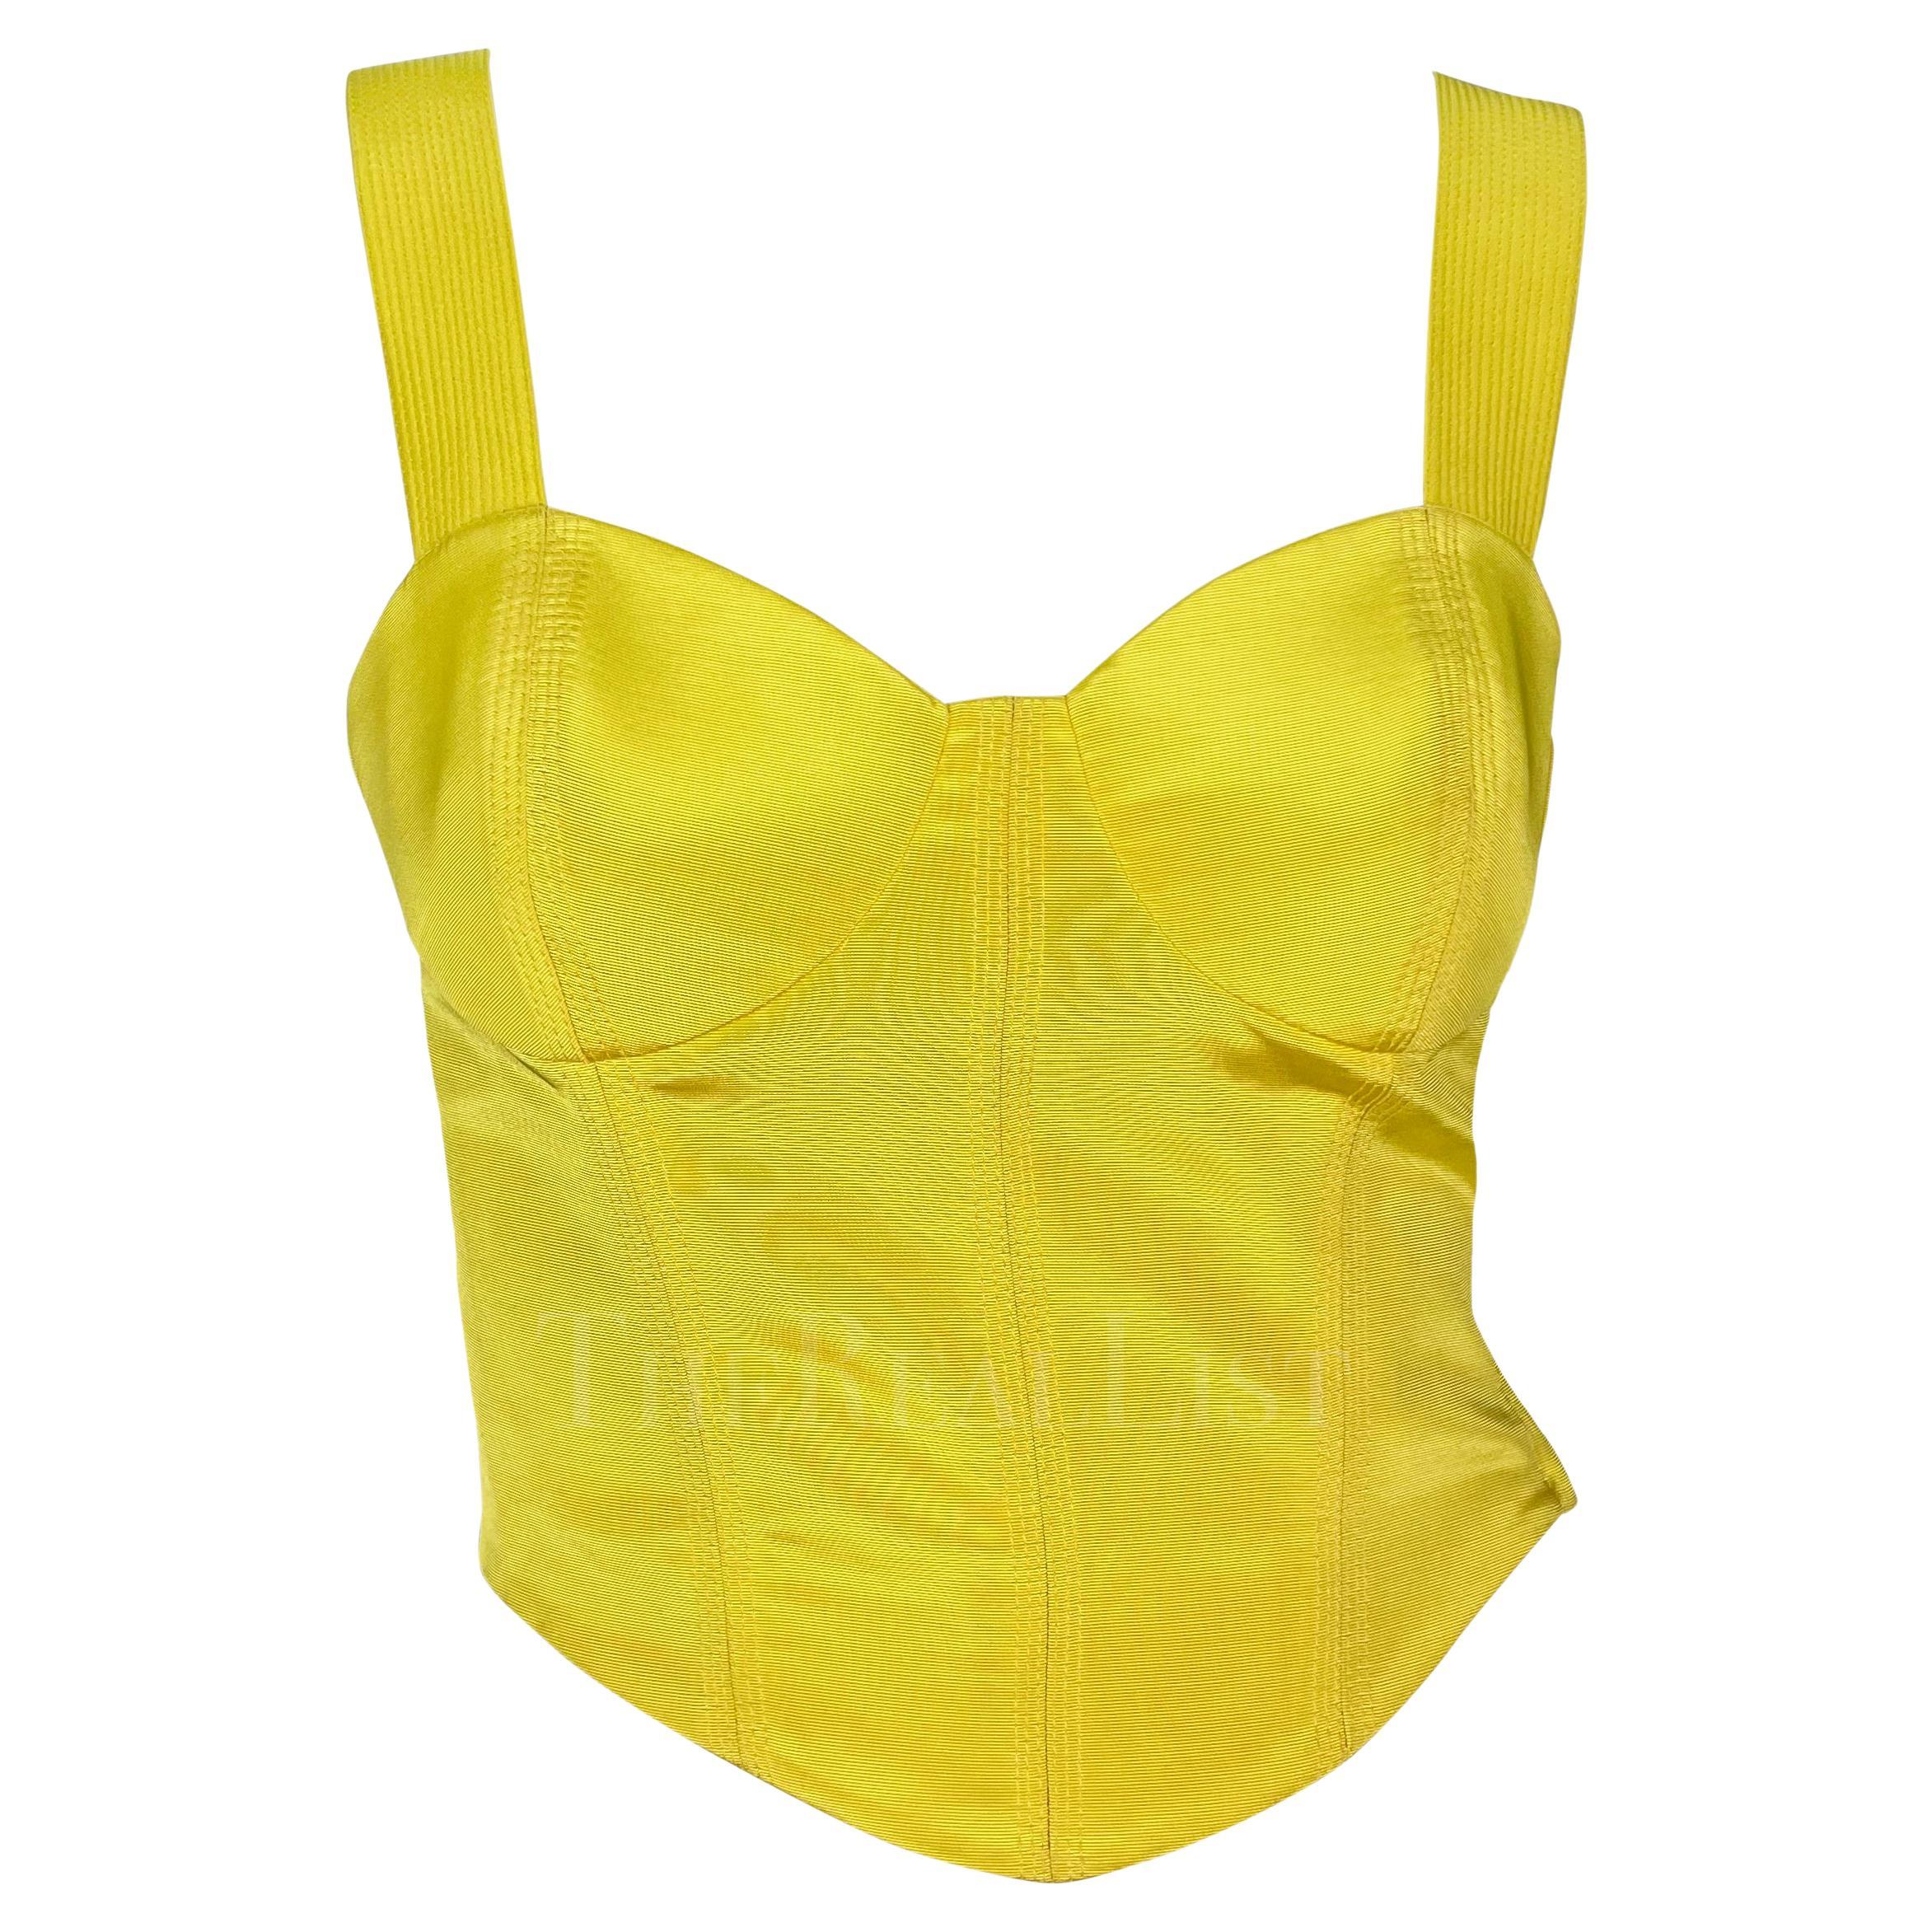 S/S 1992 Gianni Versace Canary Yellow Bustier Crop Top For Sale